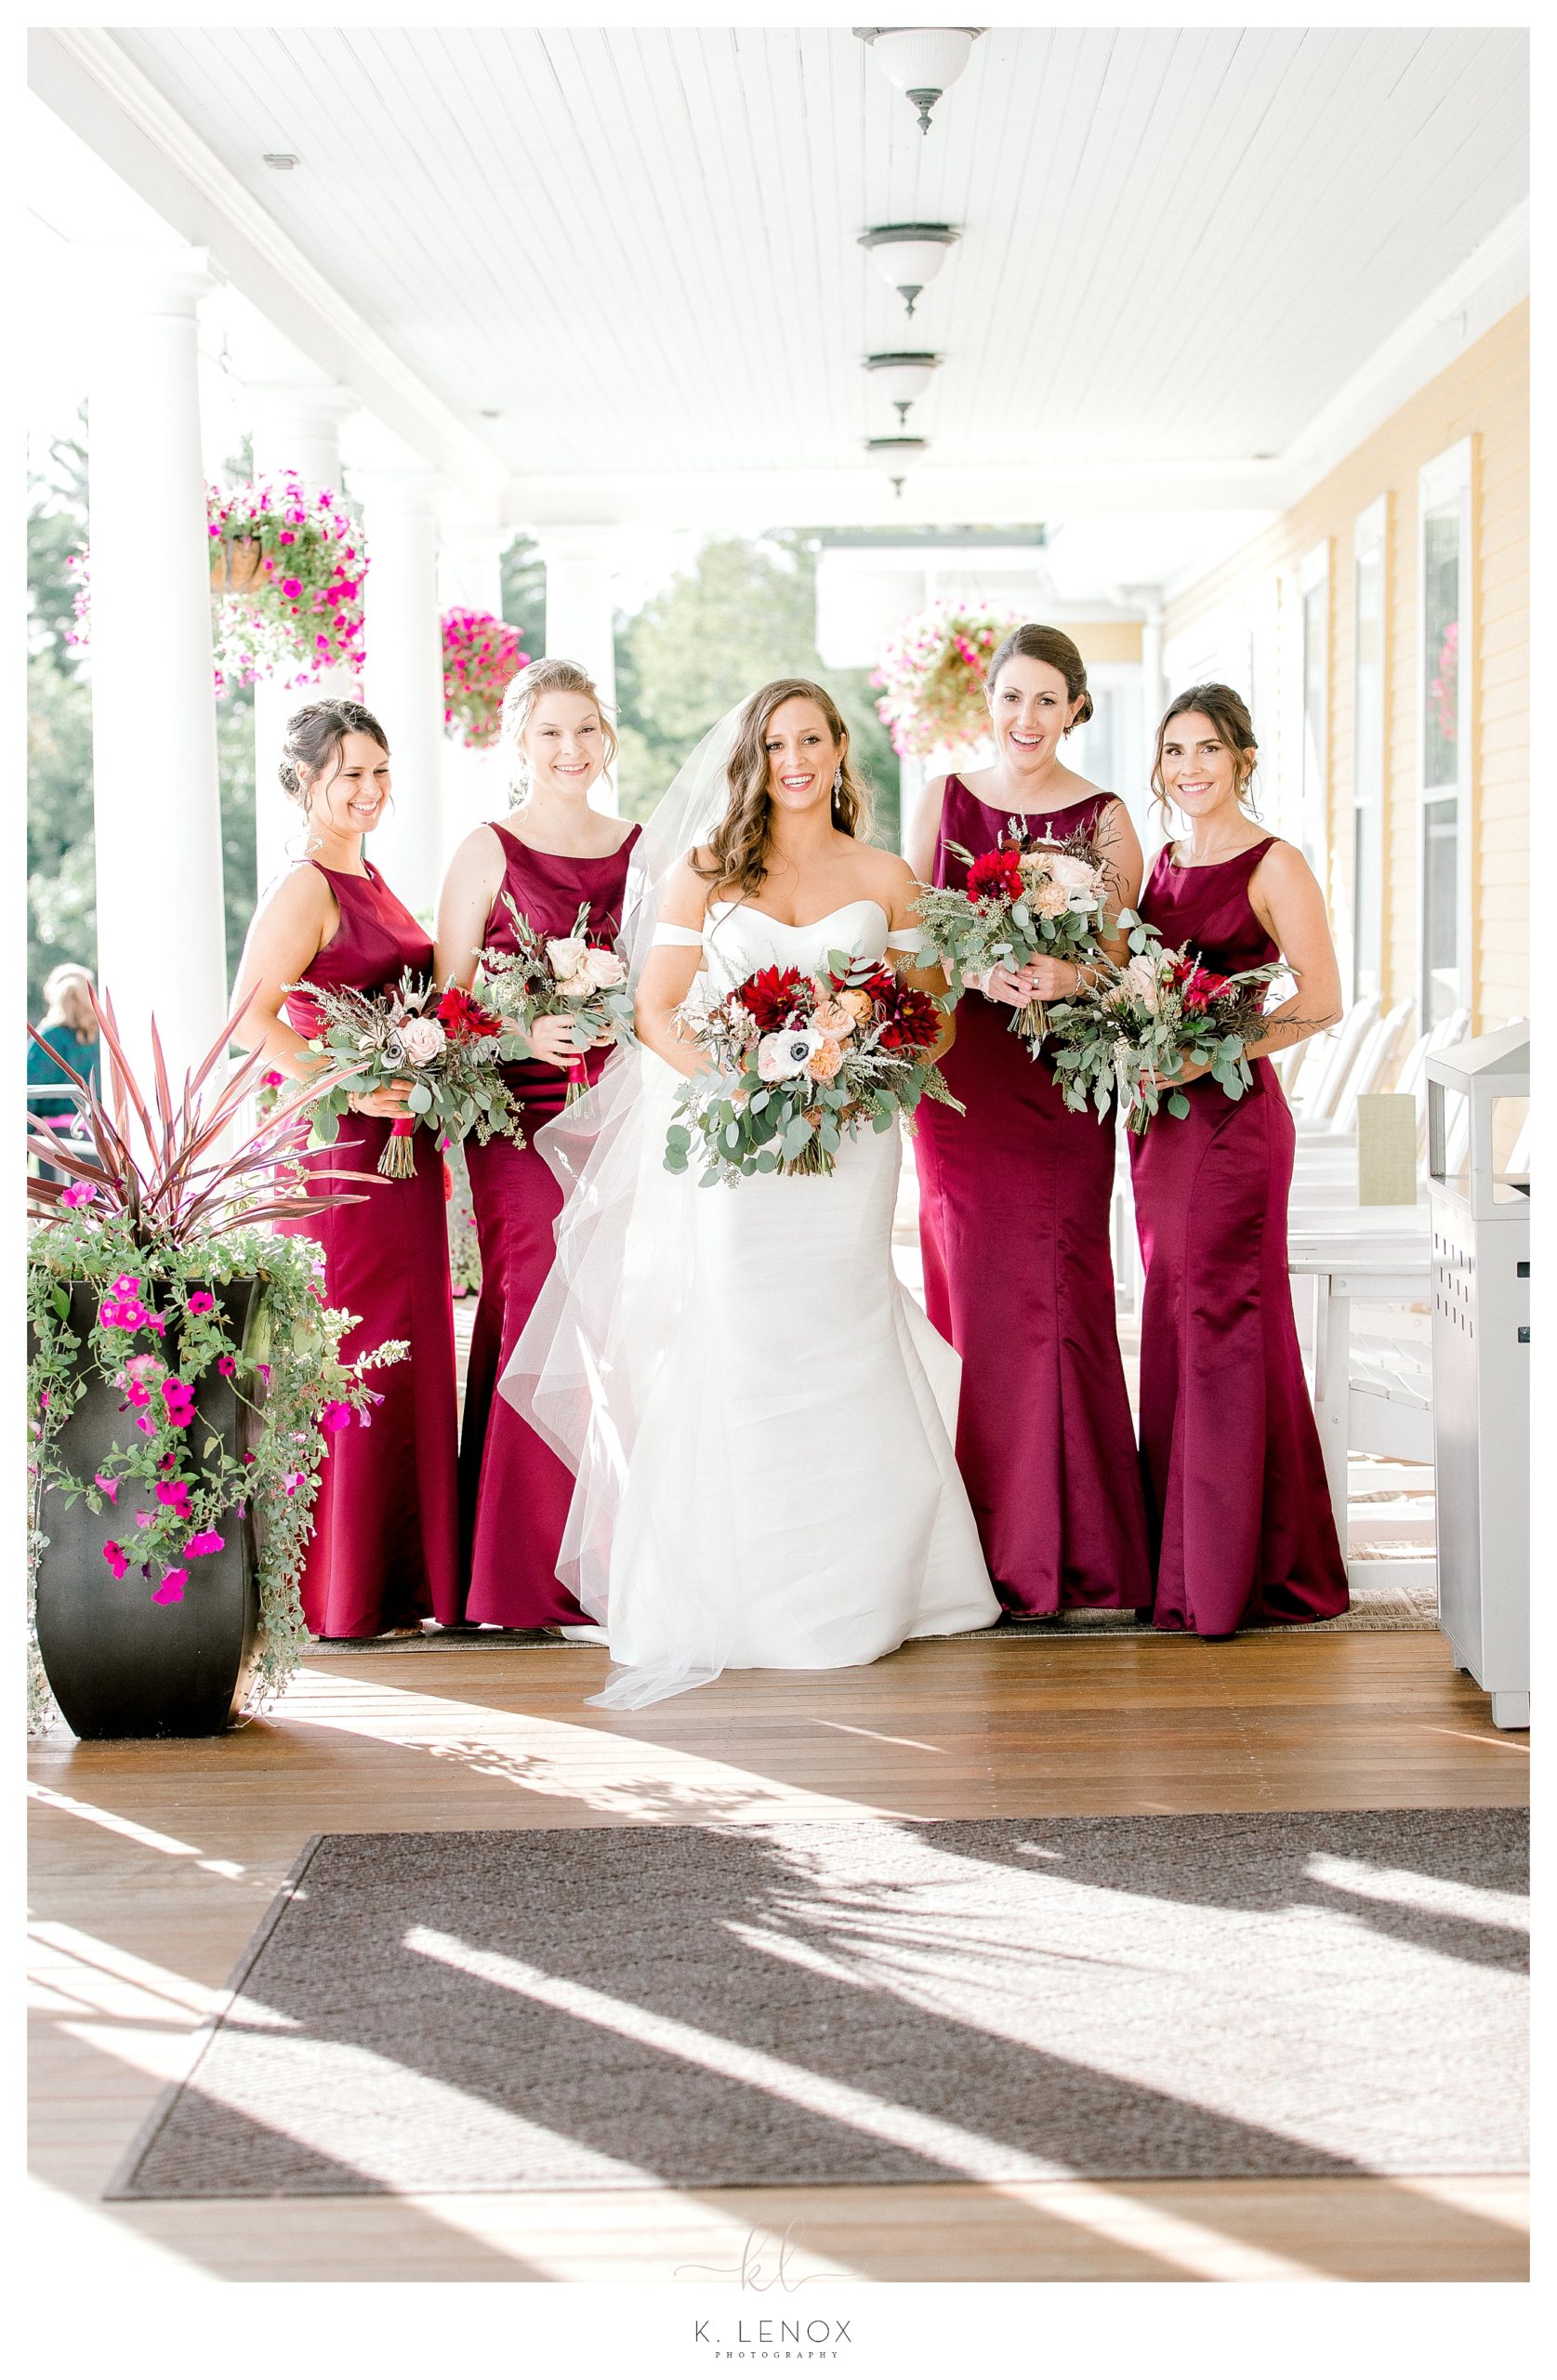 Bride with her bridesmaids wearing Red/Maroon gowns. 